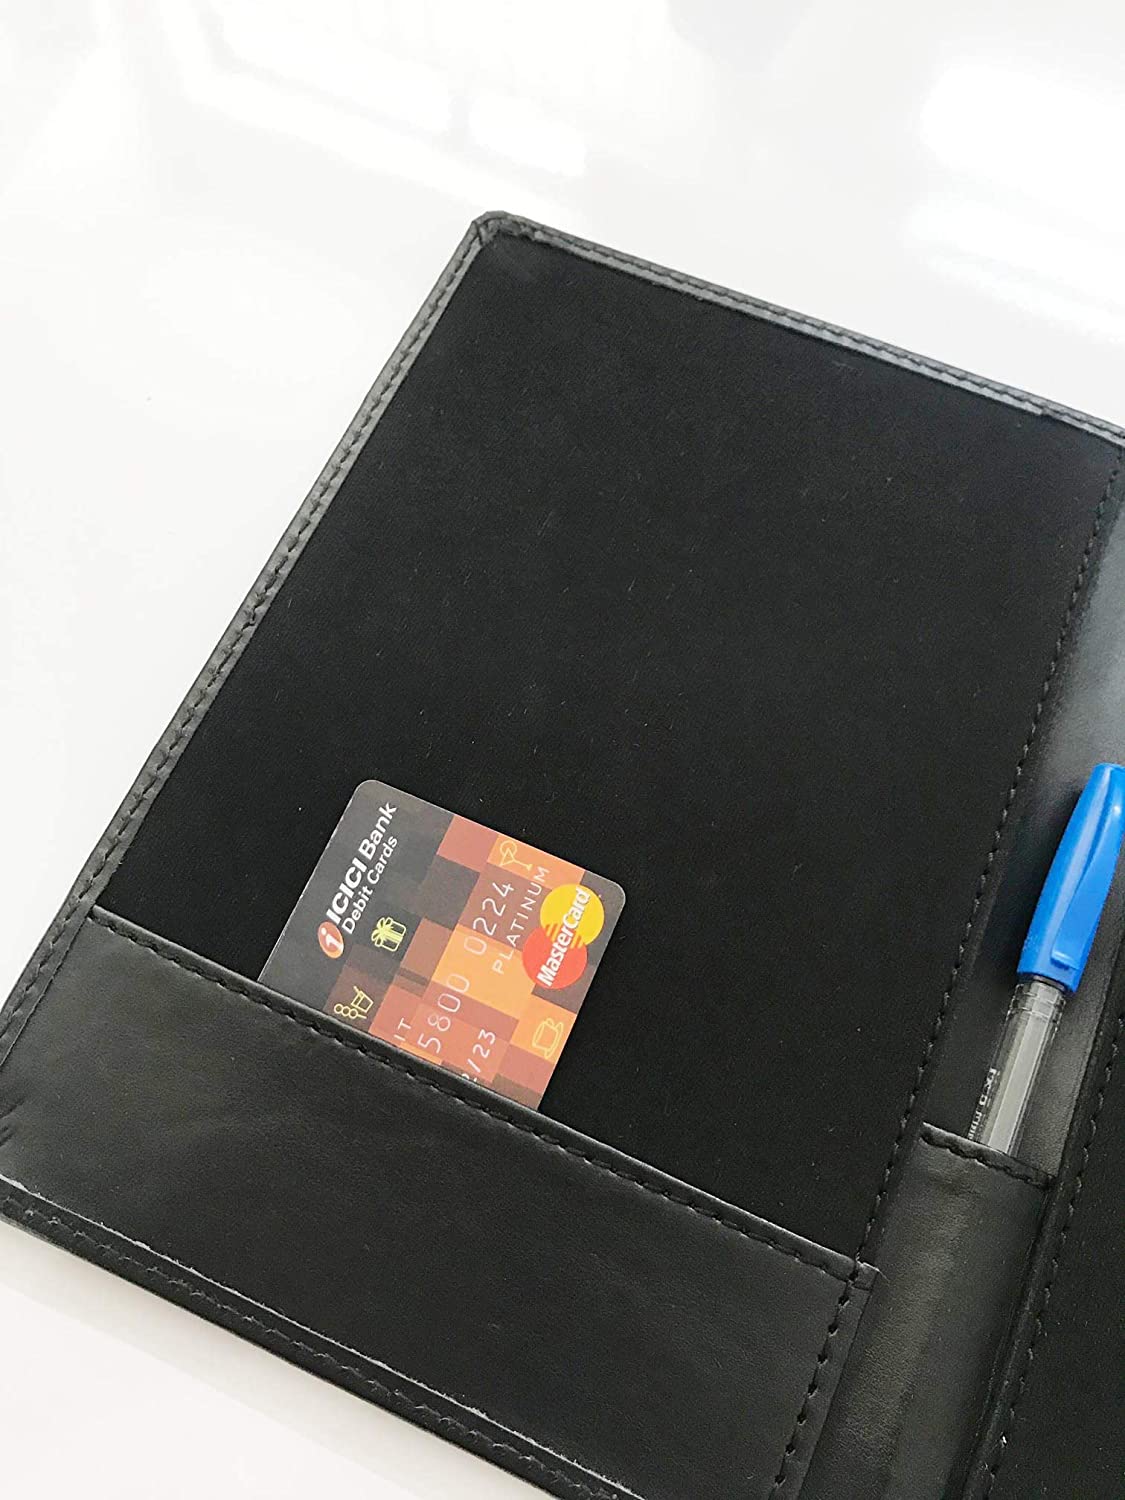 NJ Bill folder for hotel and Restaurant, Guest Check Presenter, Bill folder with Credit Card Pocket and Bill Receipt Pocket (9x6 Inches) - BLACK LEATHER